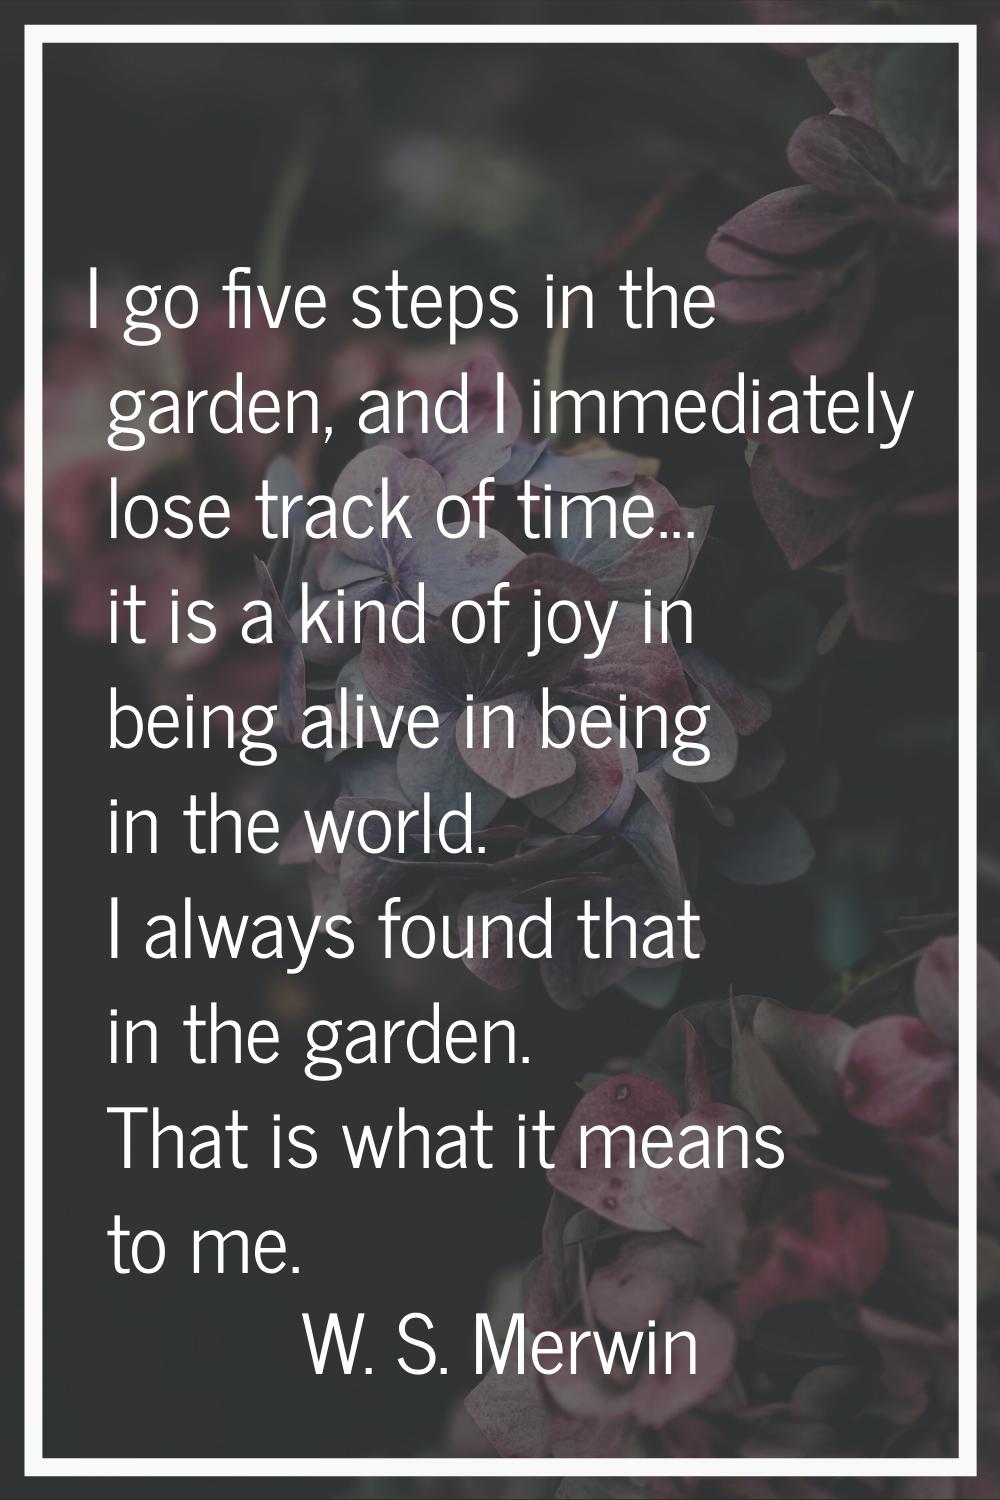 I go five steps in the garden, and I immediately lose track of time... it is a kind of joy in being